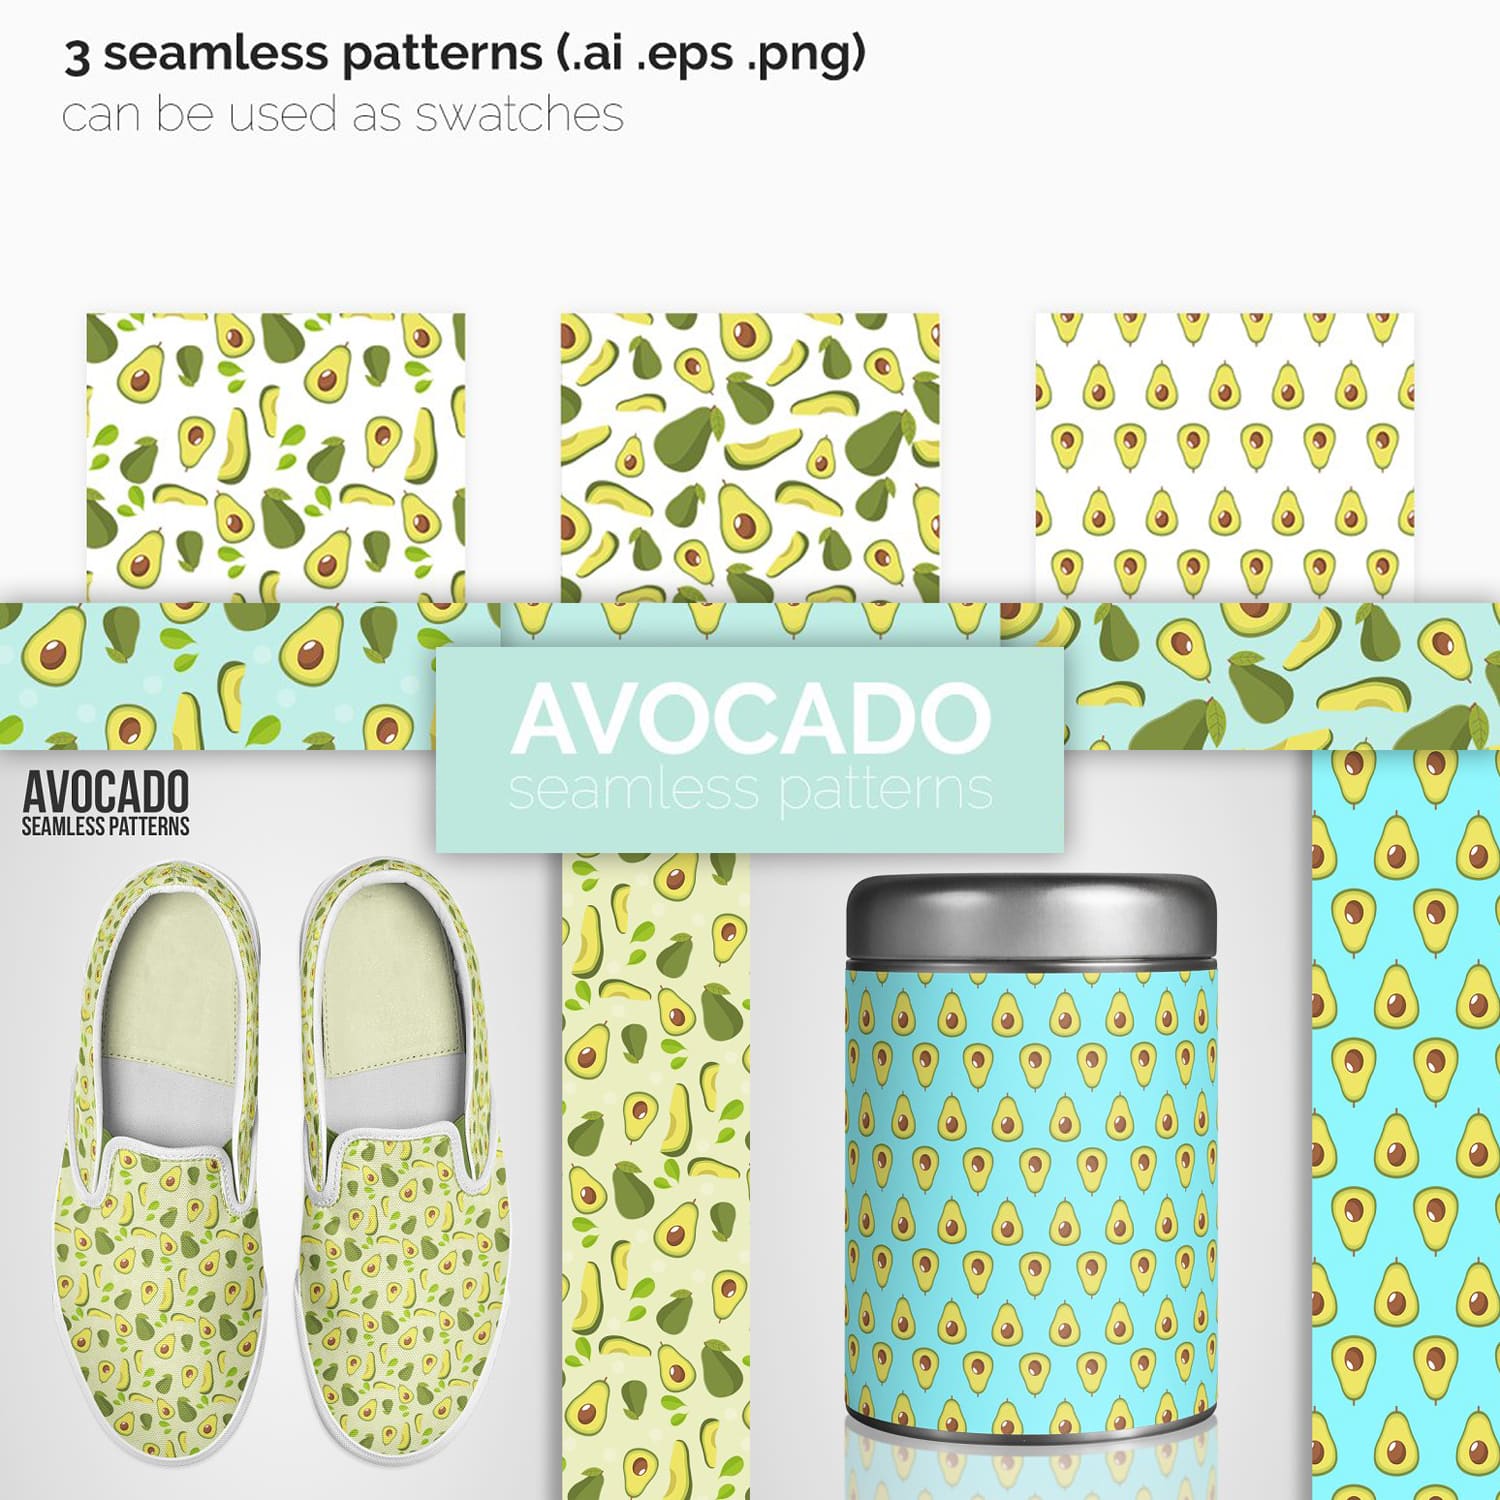 Avocado Seamless Patterns cover image.